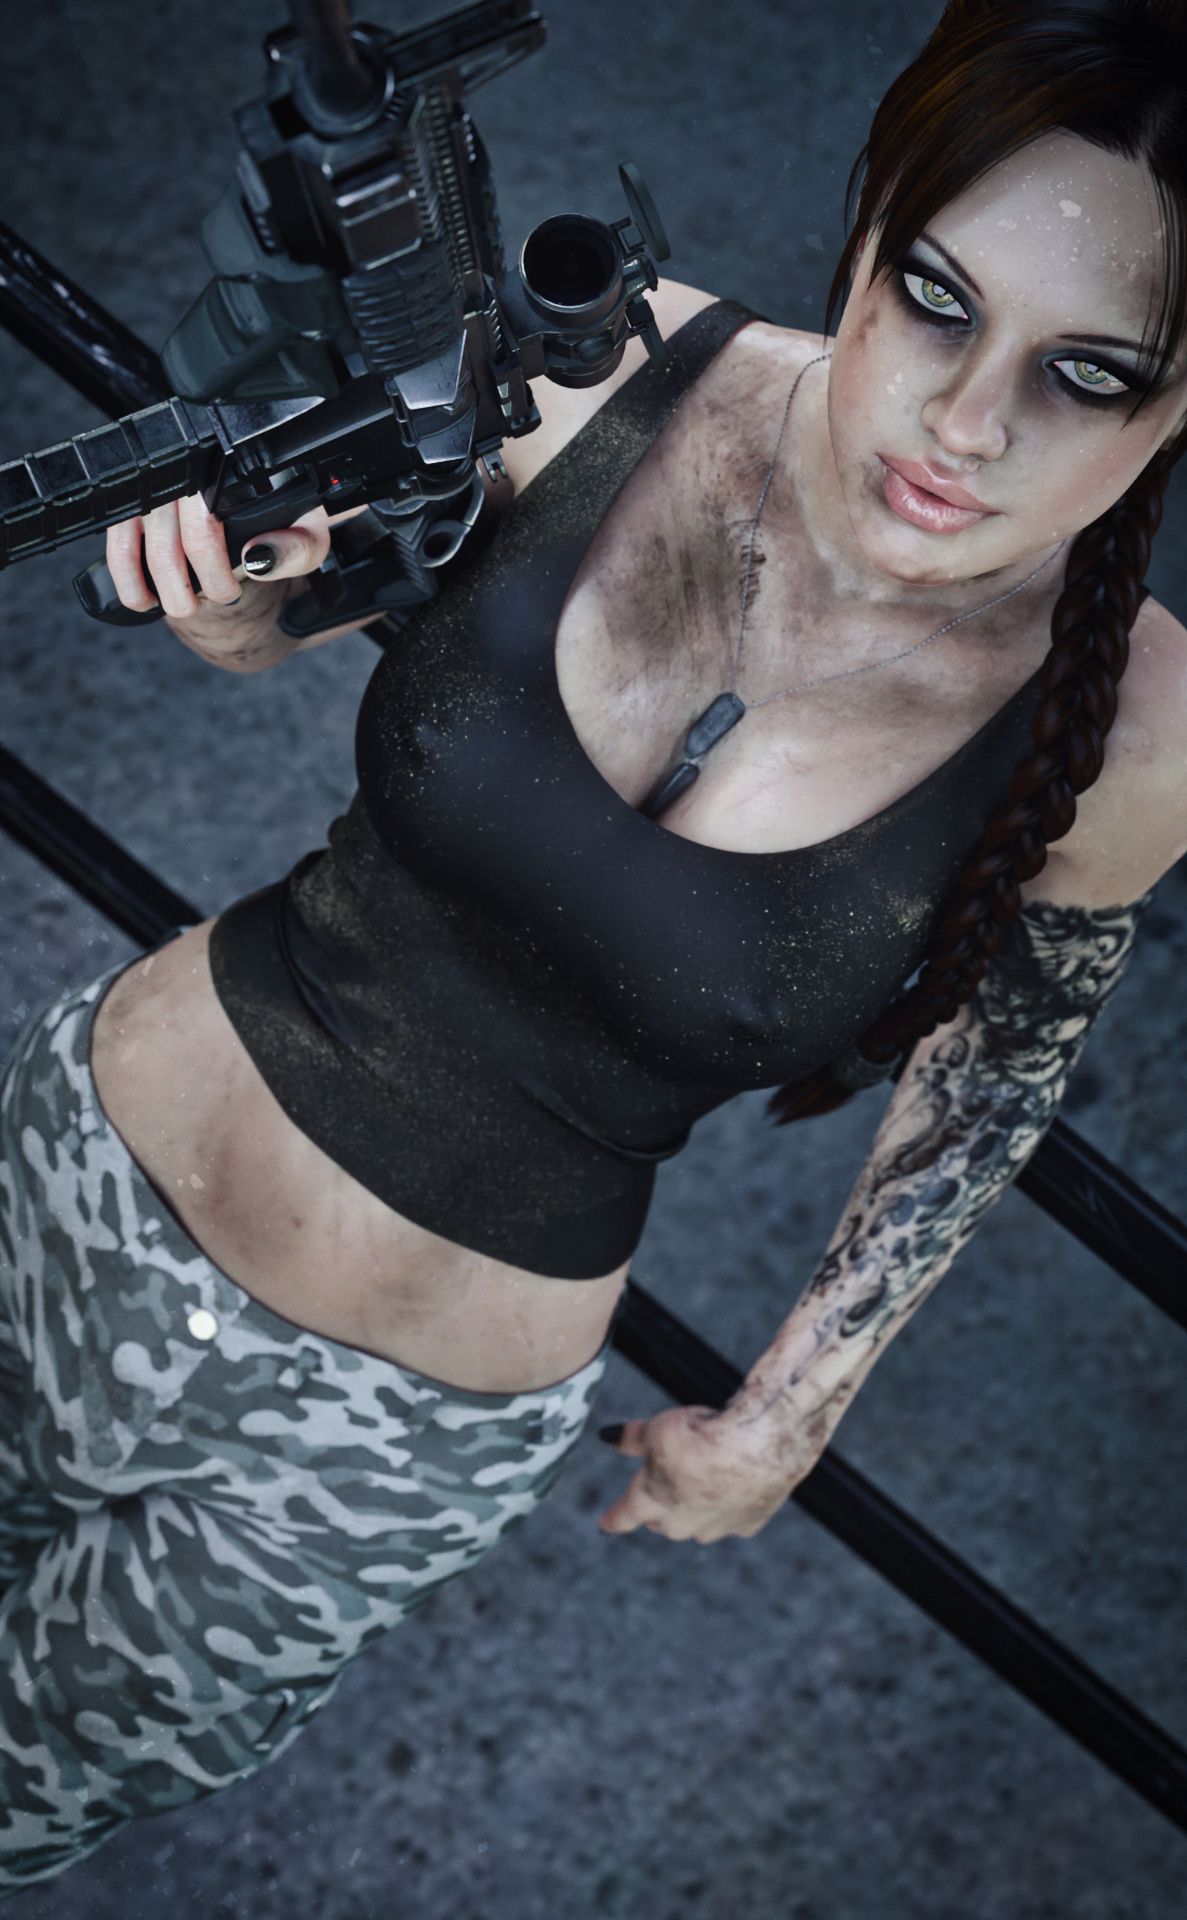 [Forged3dx] Lilith And Her Gun 3